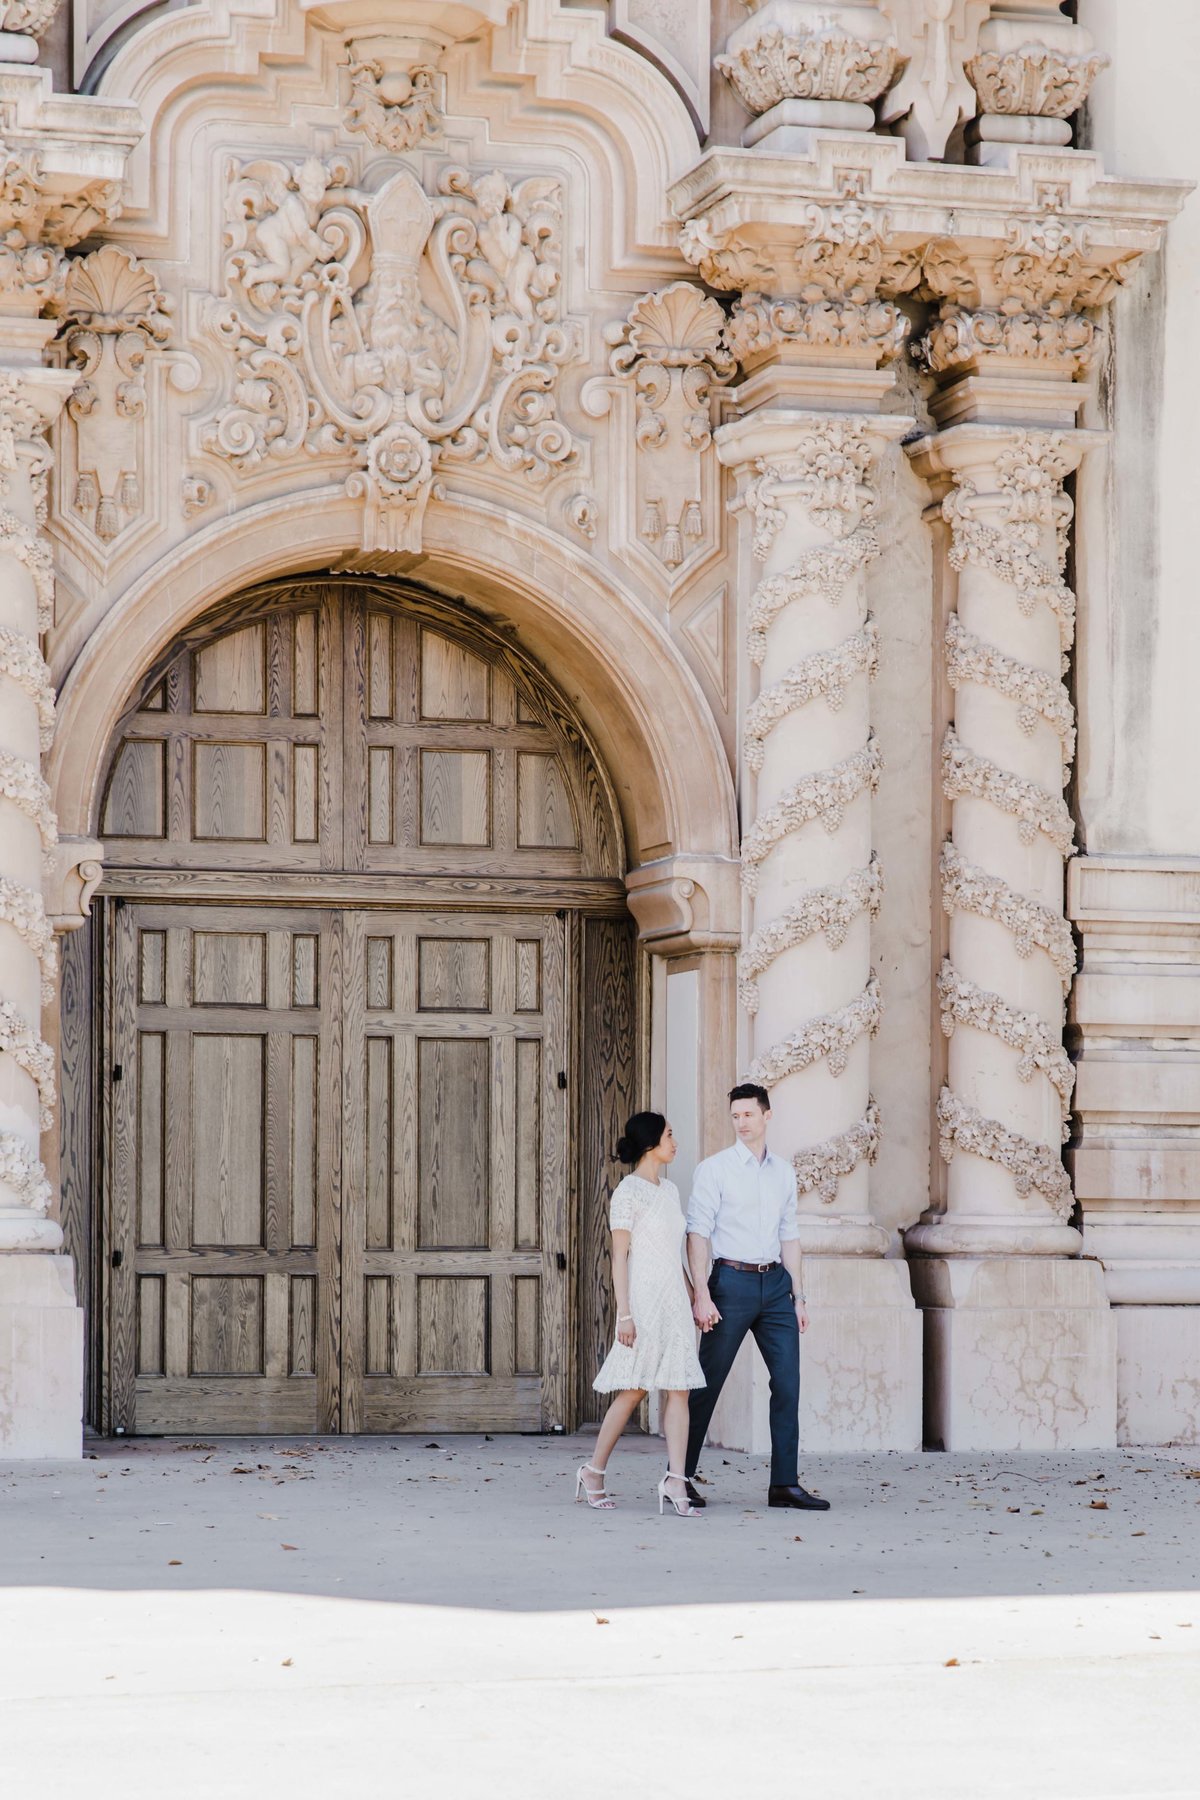 Engagement Session at Balbo Park, San Diego. Photography by Jessica Jaccarino Photography.